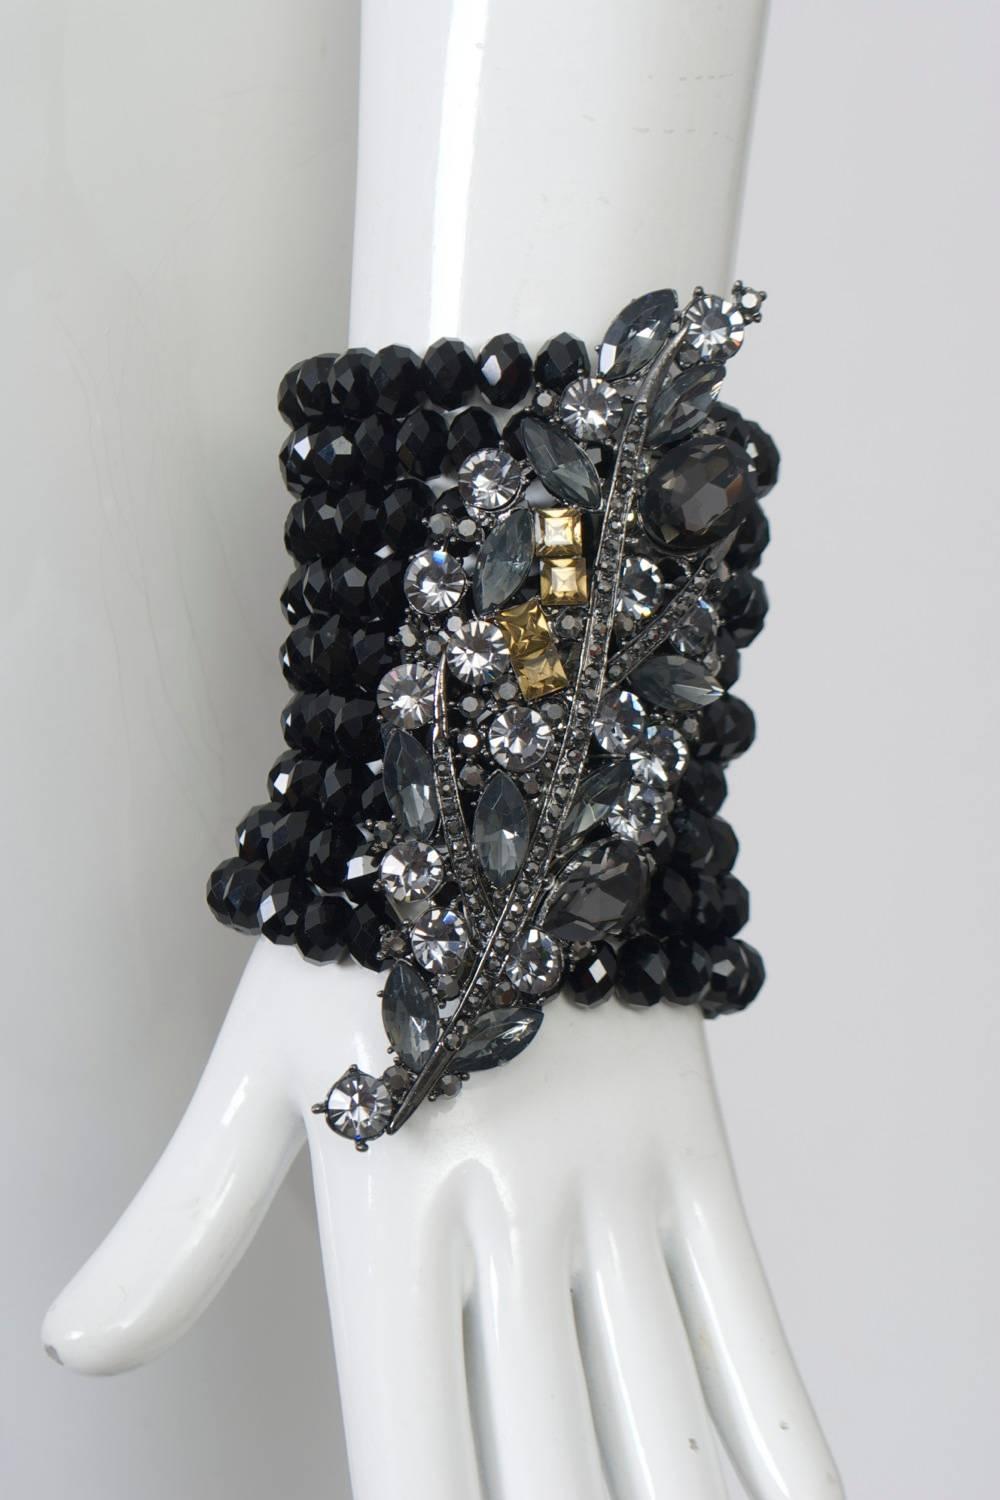 A dramatic bracelet composed of nine rows of faceted black beads on stretch cords featuring a large centerpiece of leaf form set with light and dark gray crystals of various shapes and sizes accented by four golden-toned stones. Toby Fischer, under